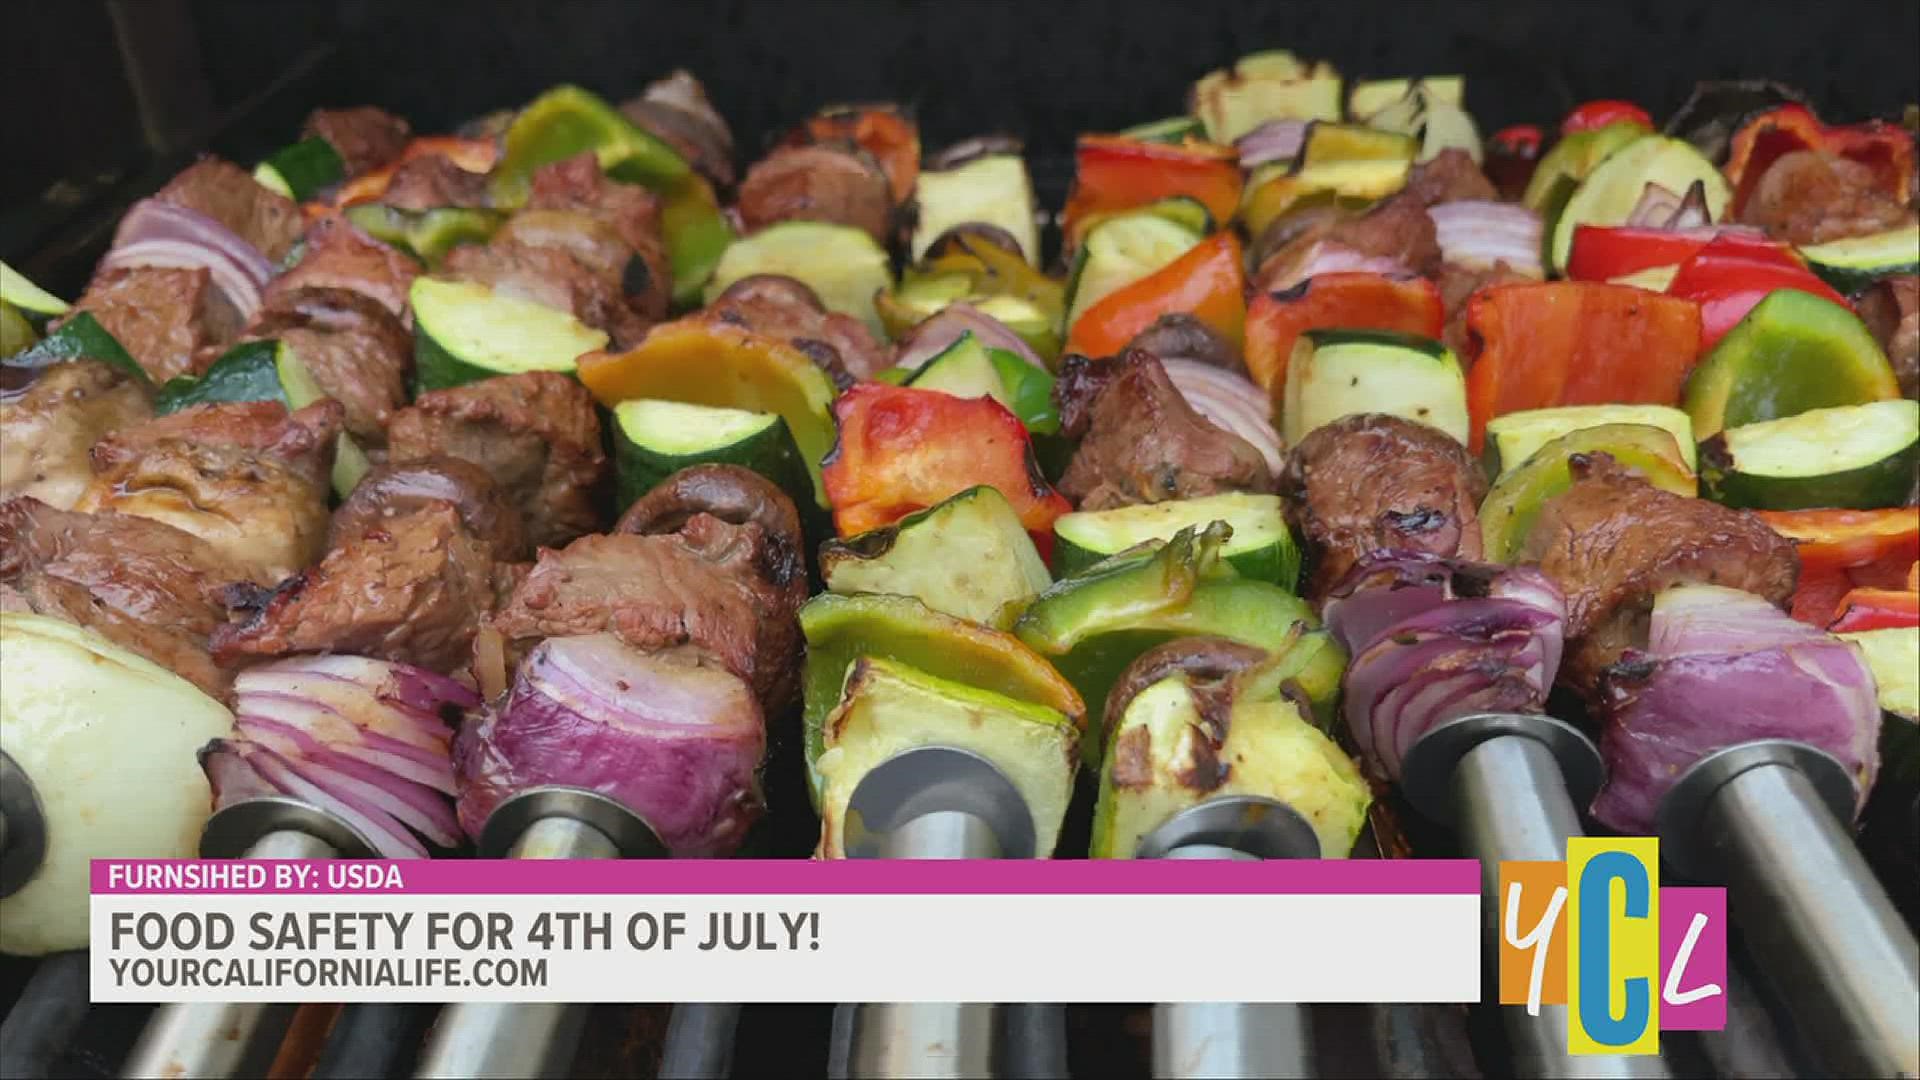 As you fire up the grill this fourth of July weekend, make sure to practice these food safety tips to ensure a happy and safe time!